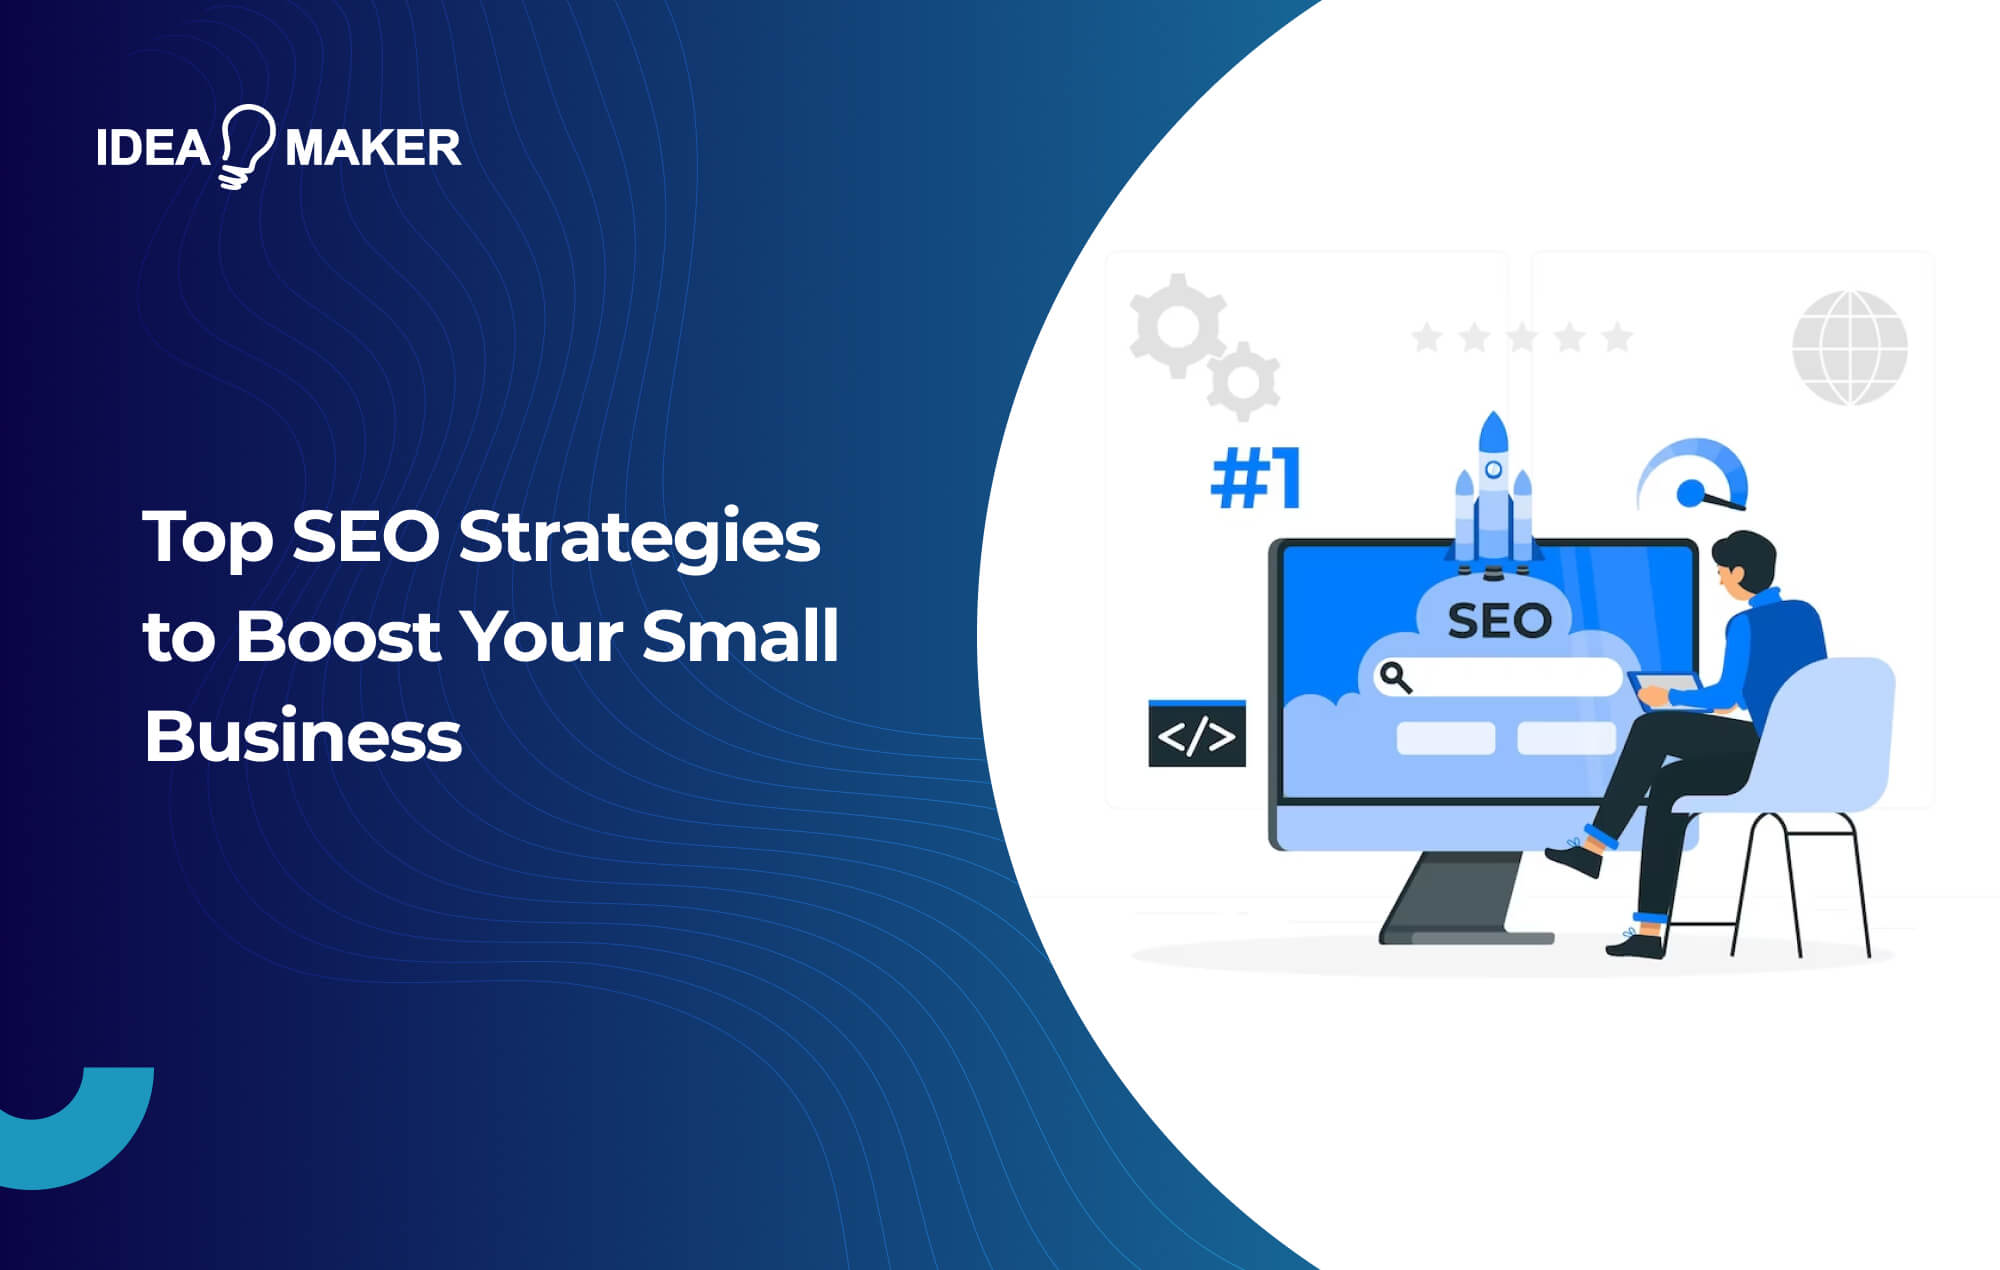 Ideamaker - Top SEO Strategies to Boost Your Small Business